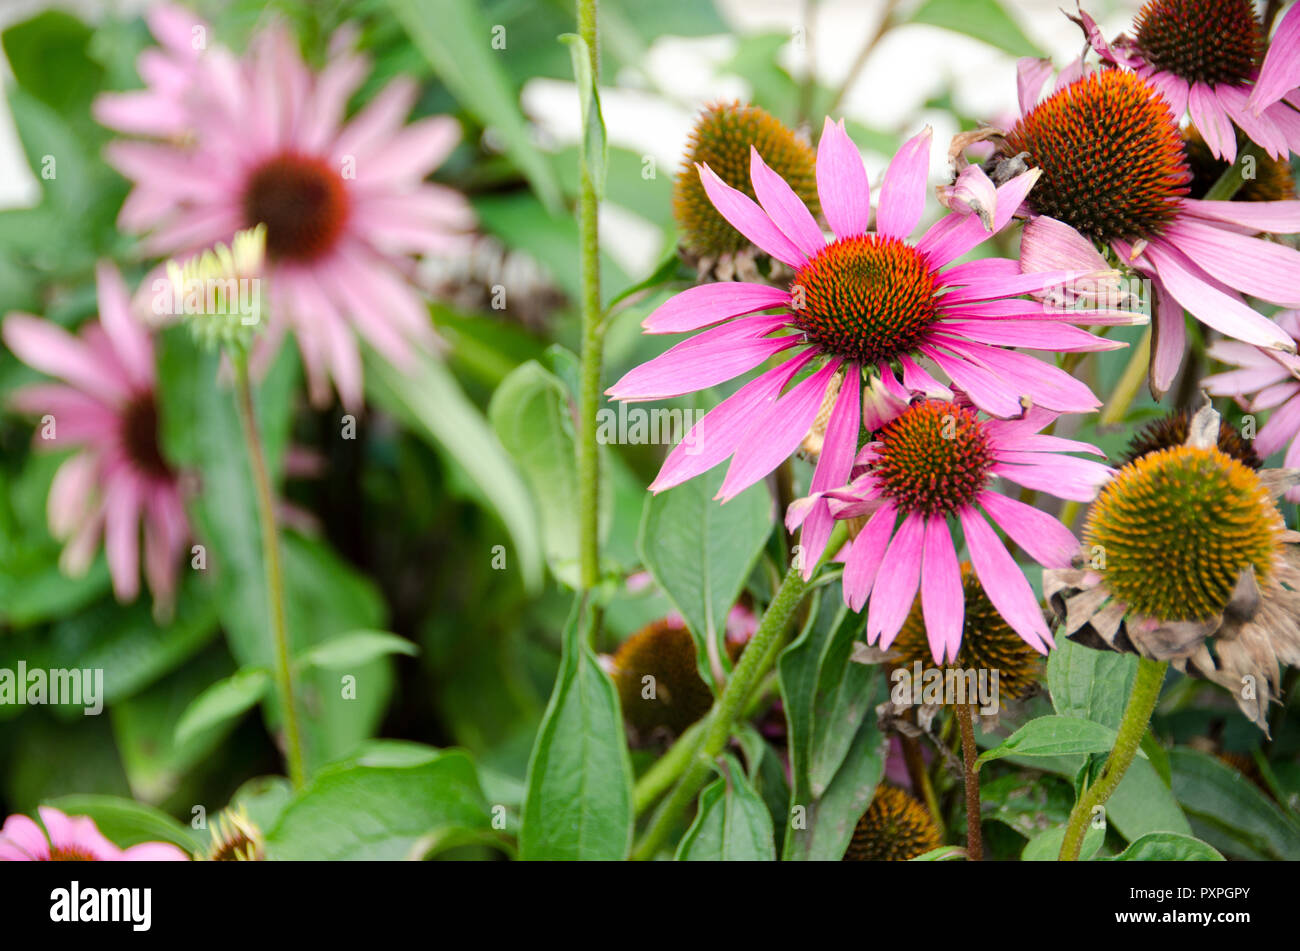 Echinacea in group of several, in a garden. Stock Photo